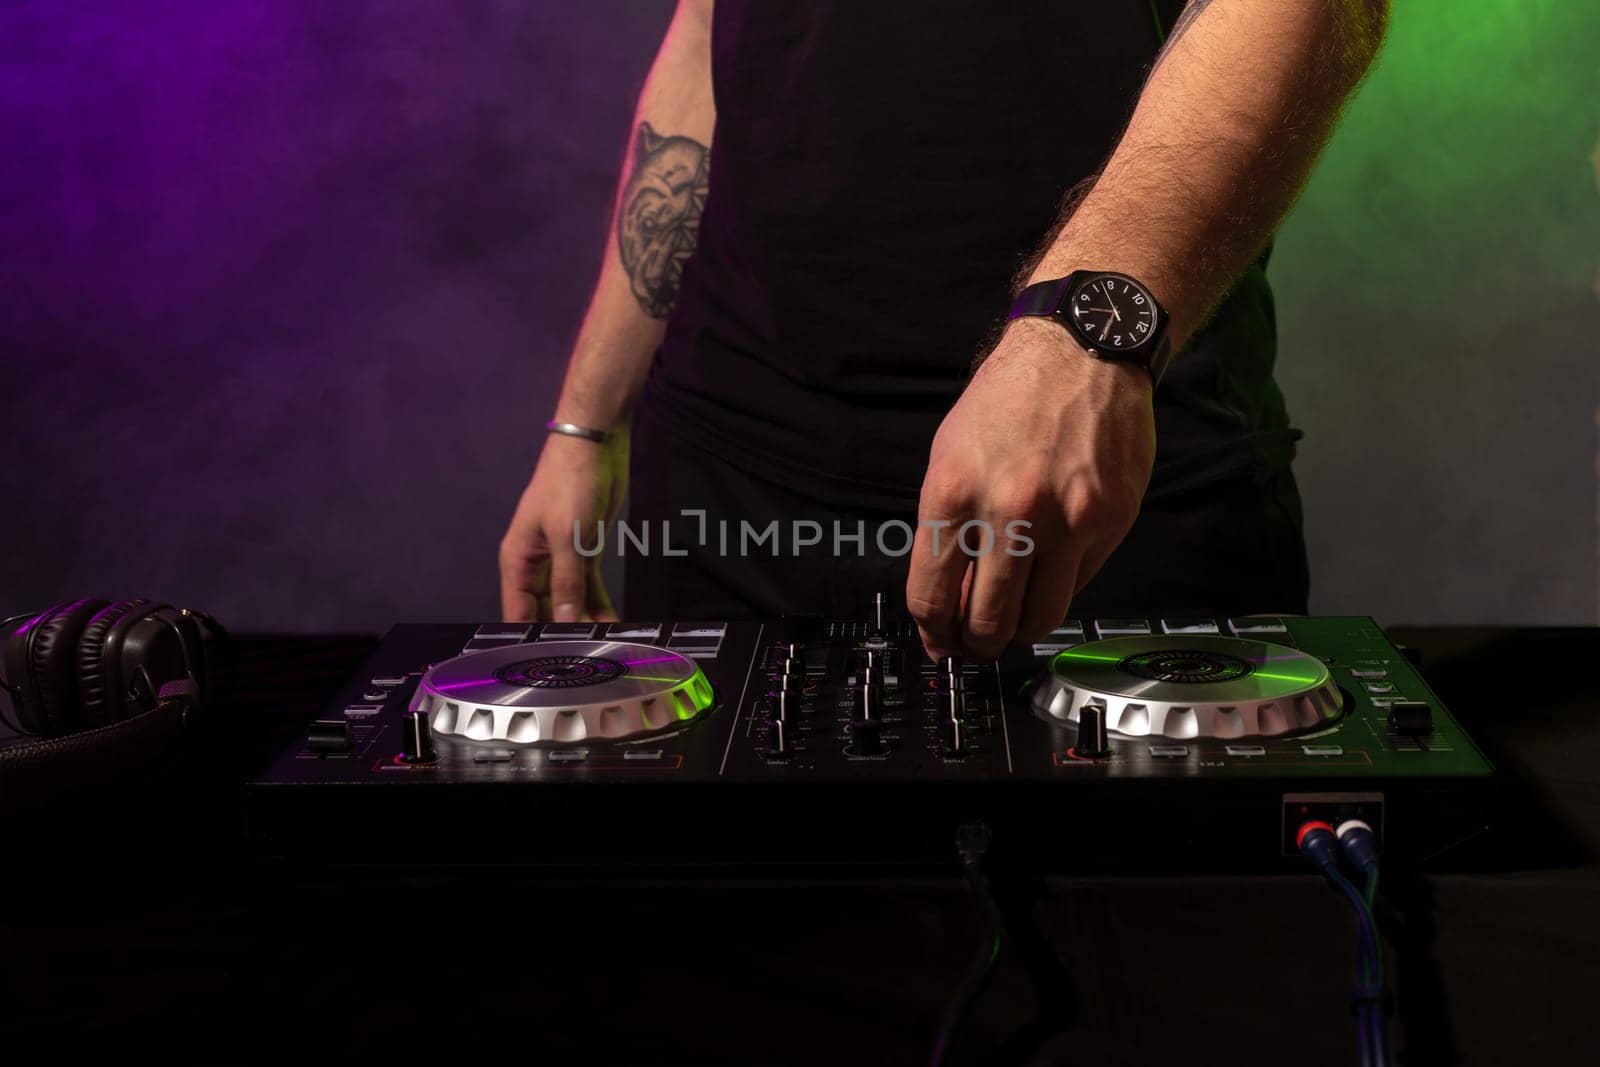 Dj mixing on turntables with color light effects. Soft focus on hand. Close-up. Fun, youth, entertainment and fest concept